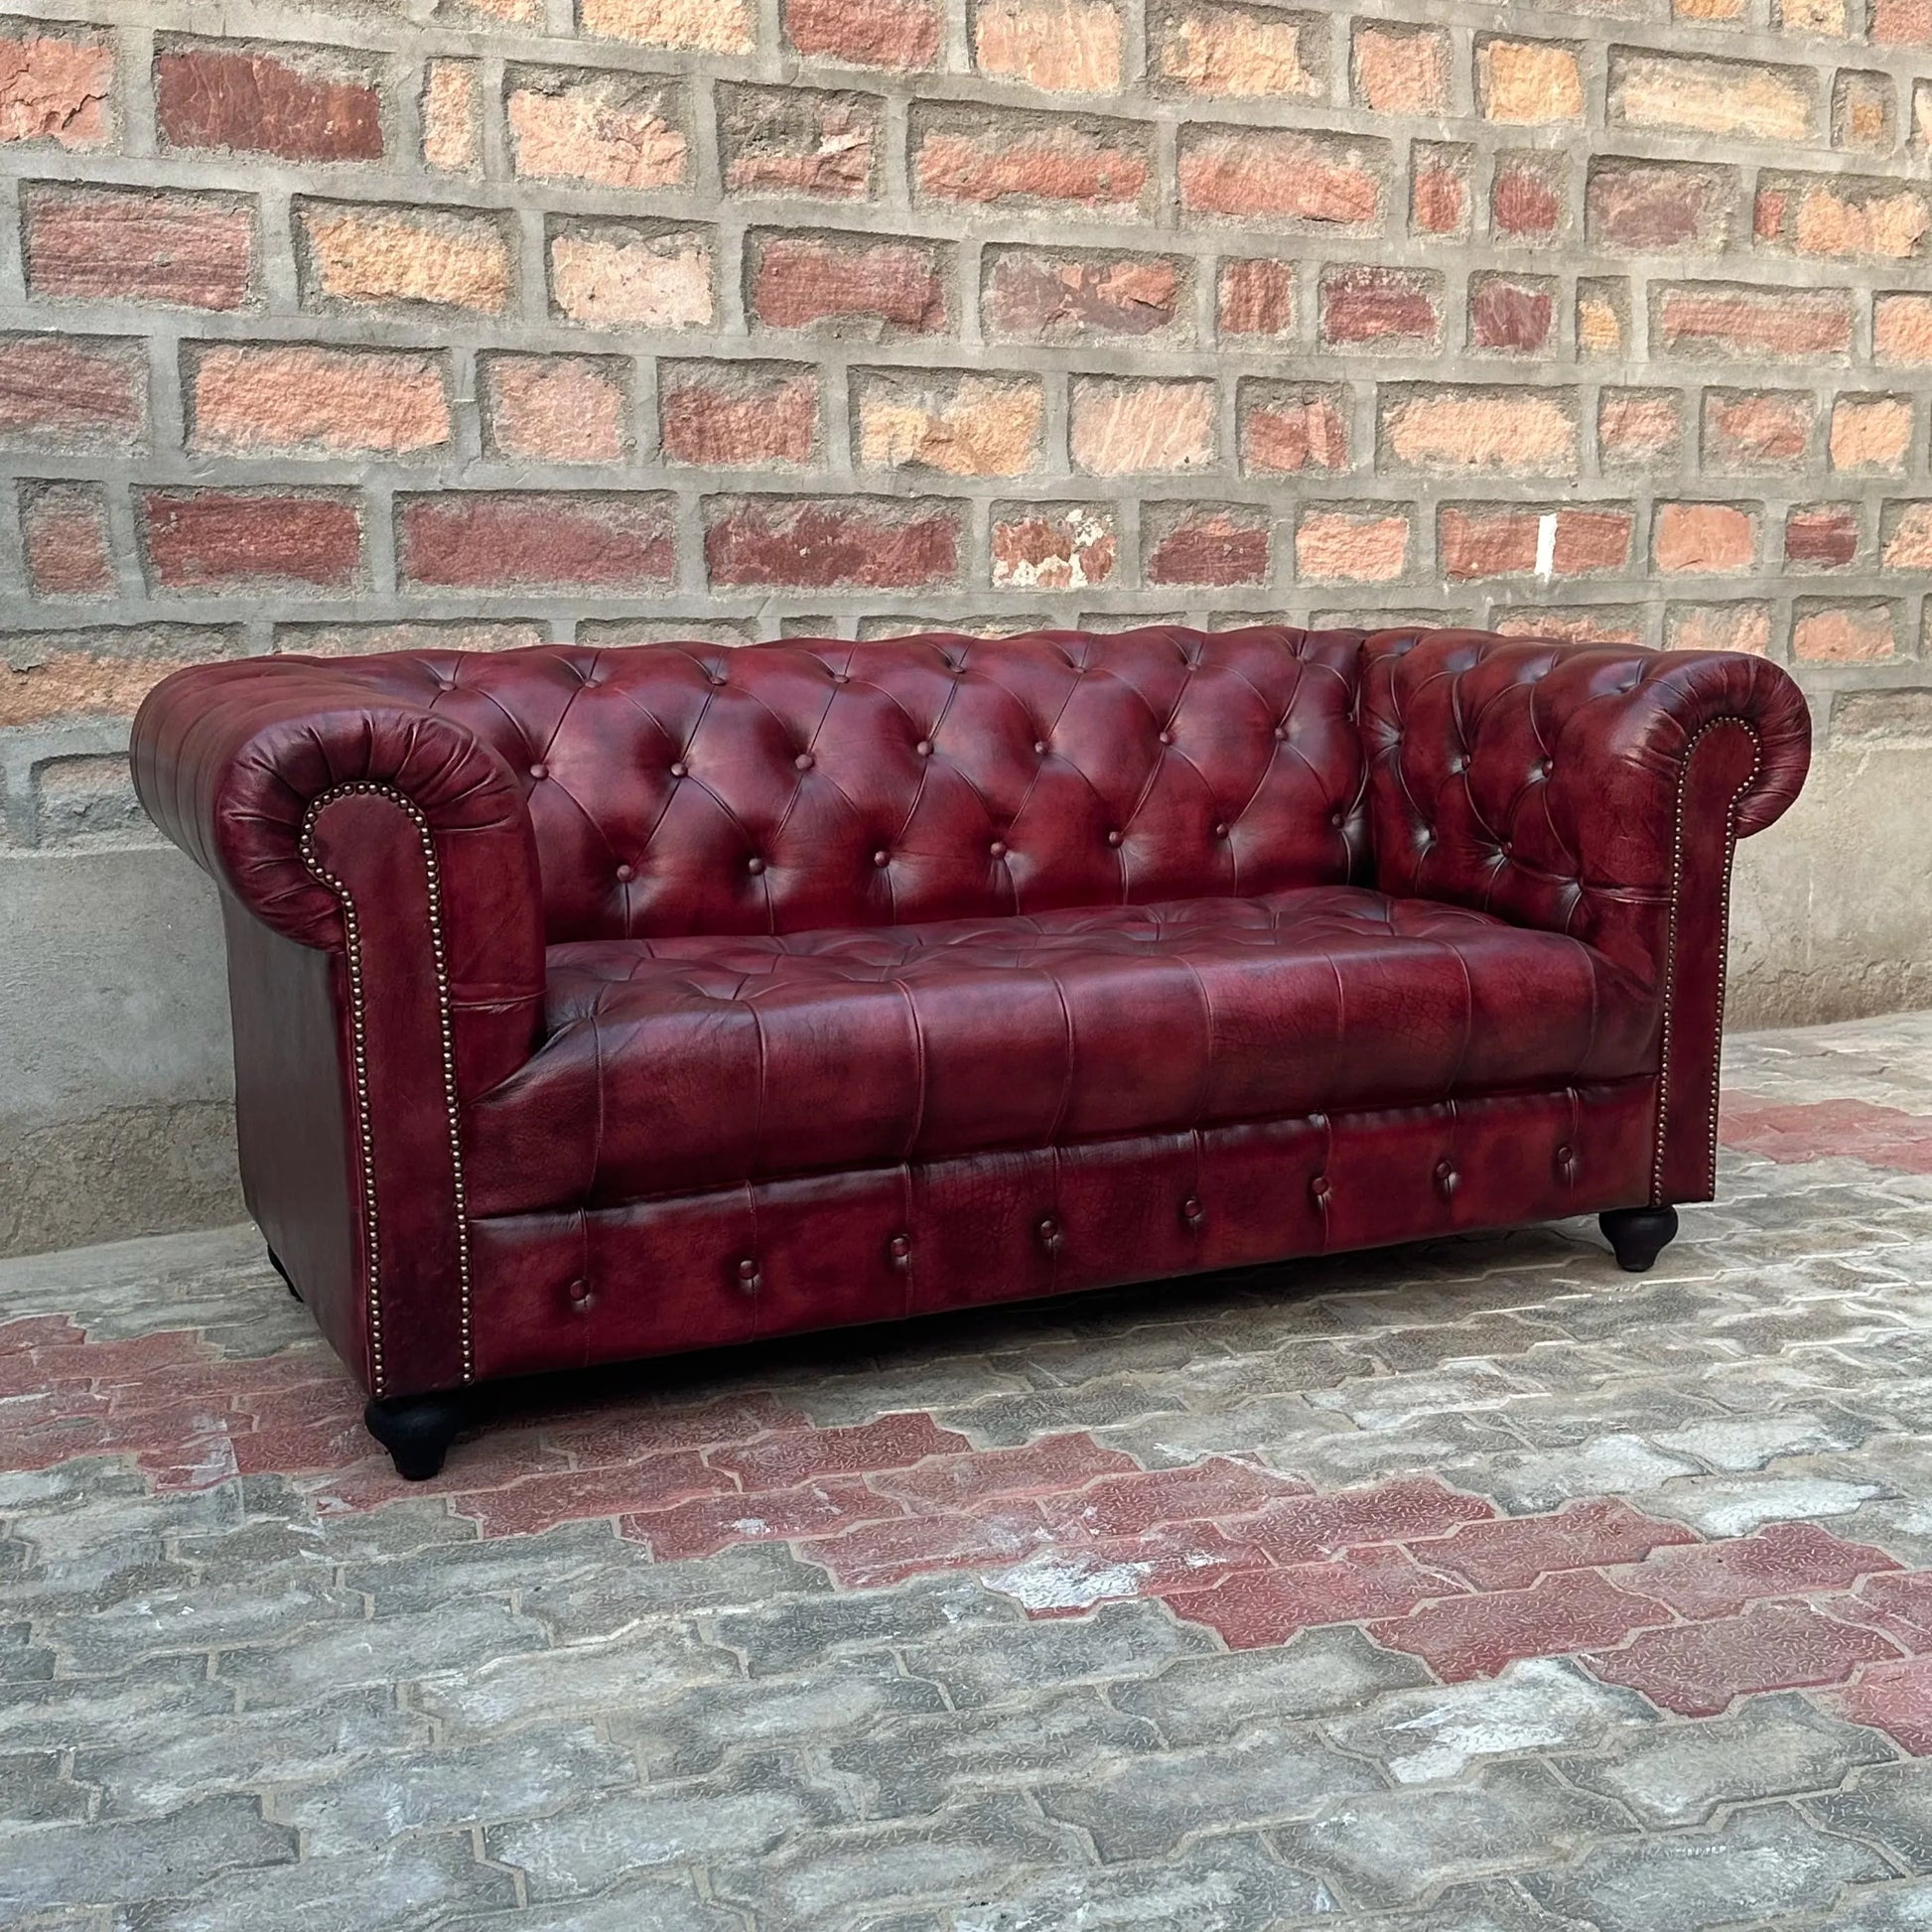 71" Loveseat Tufted Bench | Oxford Red Chesterfield Leather Loveseat with Tufted Bench Seats (OR-2T) by Rising Tide Design Co.